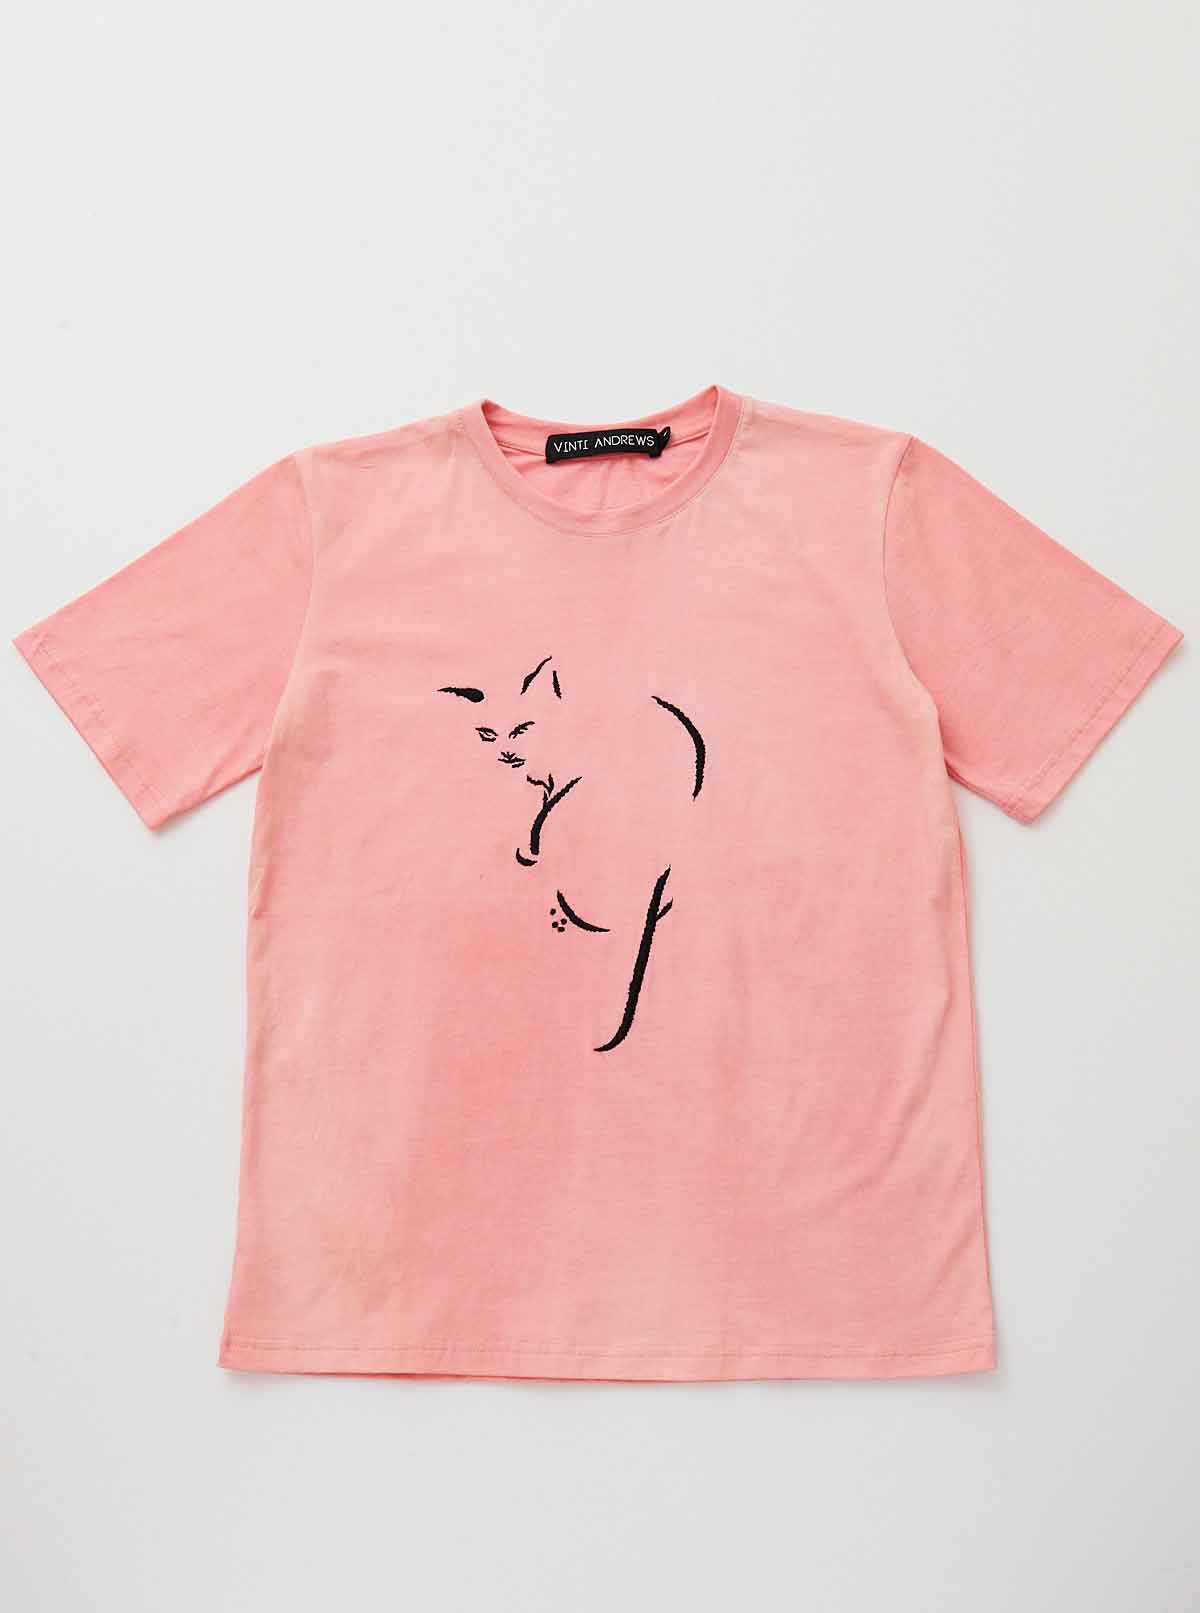 Vinti Andrews Cat Line Embroidery Girl T-Shirt